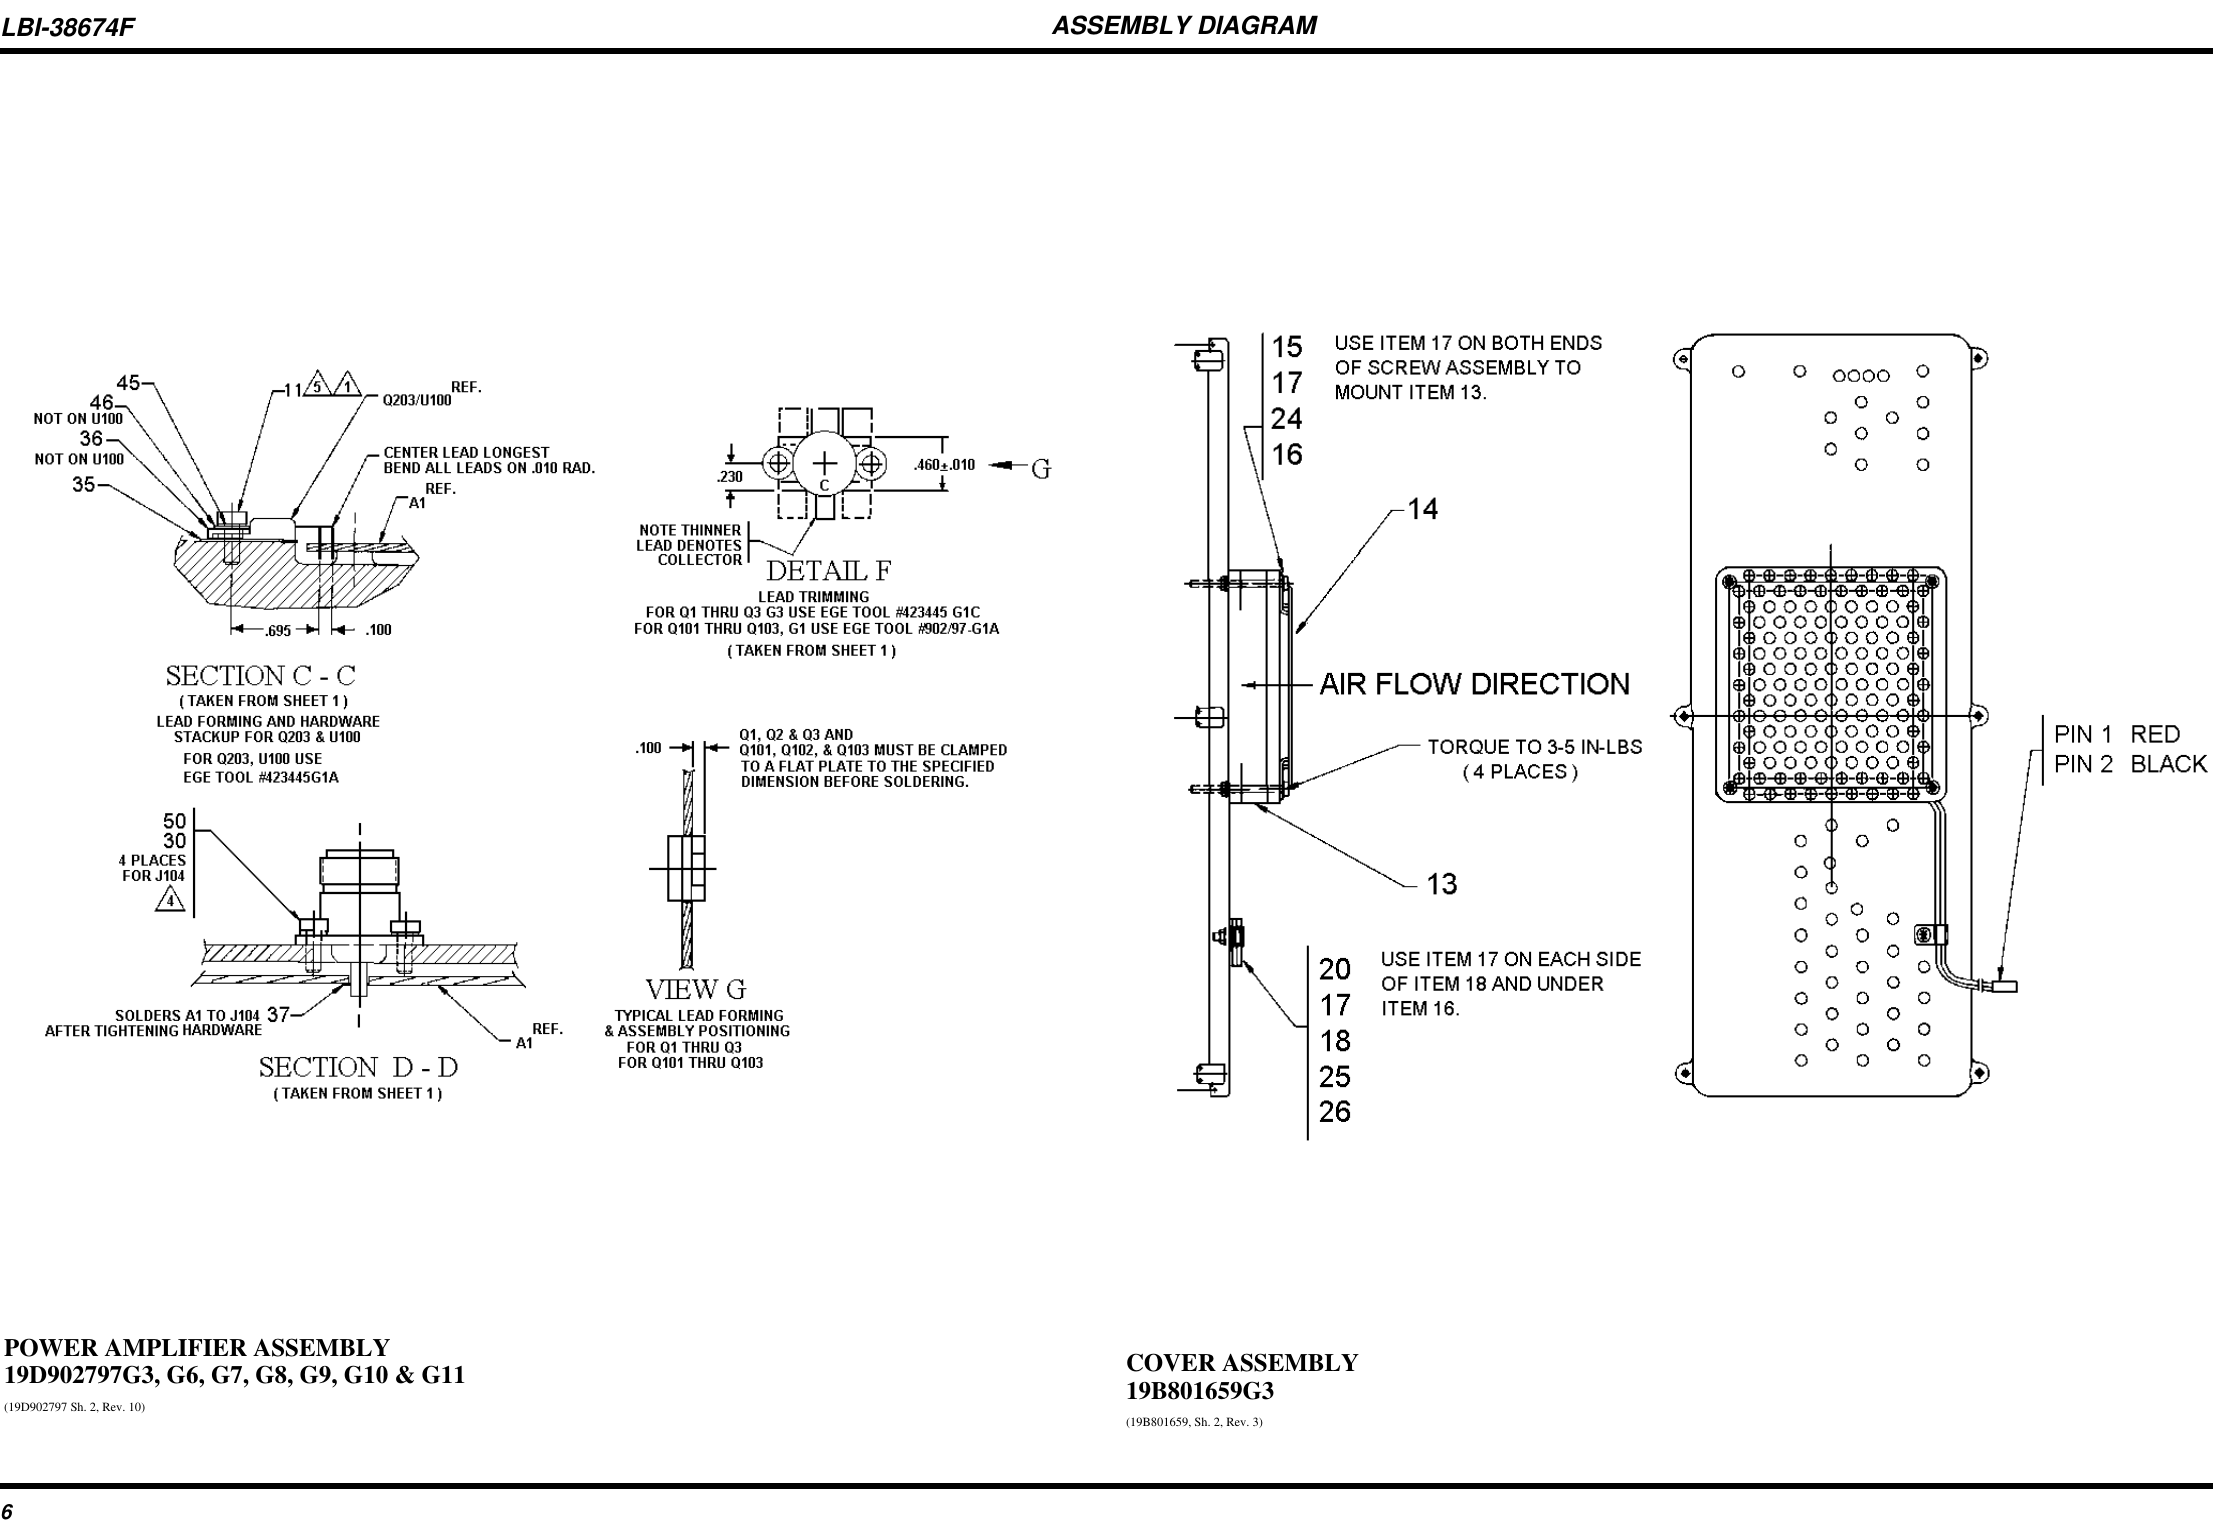 ASSEMBLY DIAGRAMPOWER AMPLIFIER ASSEMBLY19D902797G3, G6, G7, G8, G9, G10 &amp; G11(19D902797 Sh. 2, Rev. 10)COVER ASSEMBLY19B801659G3(19B801659, Sh. 2, Rev. 3)LBI-38674F6